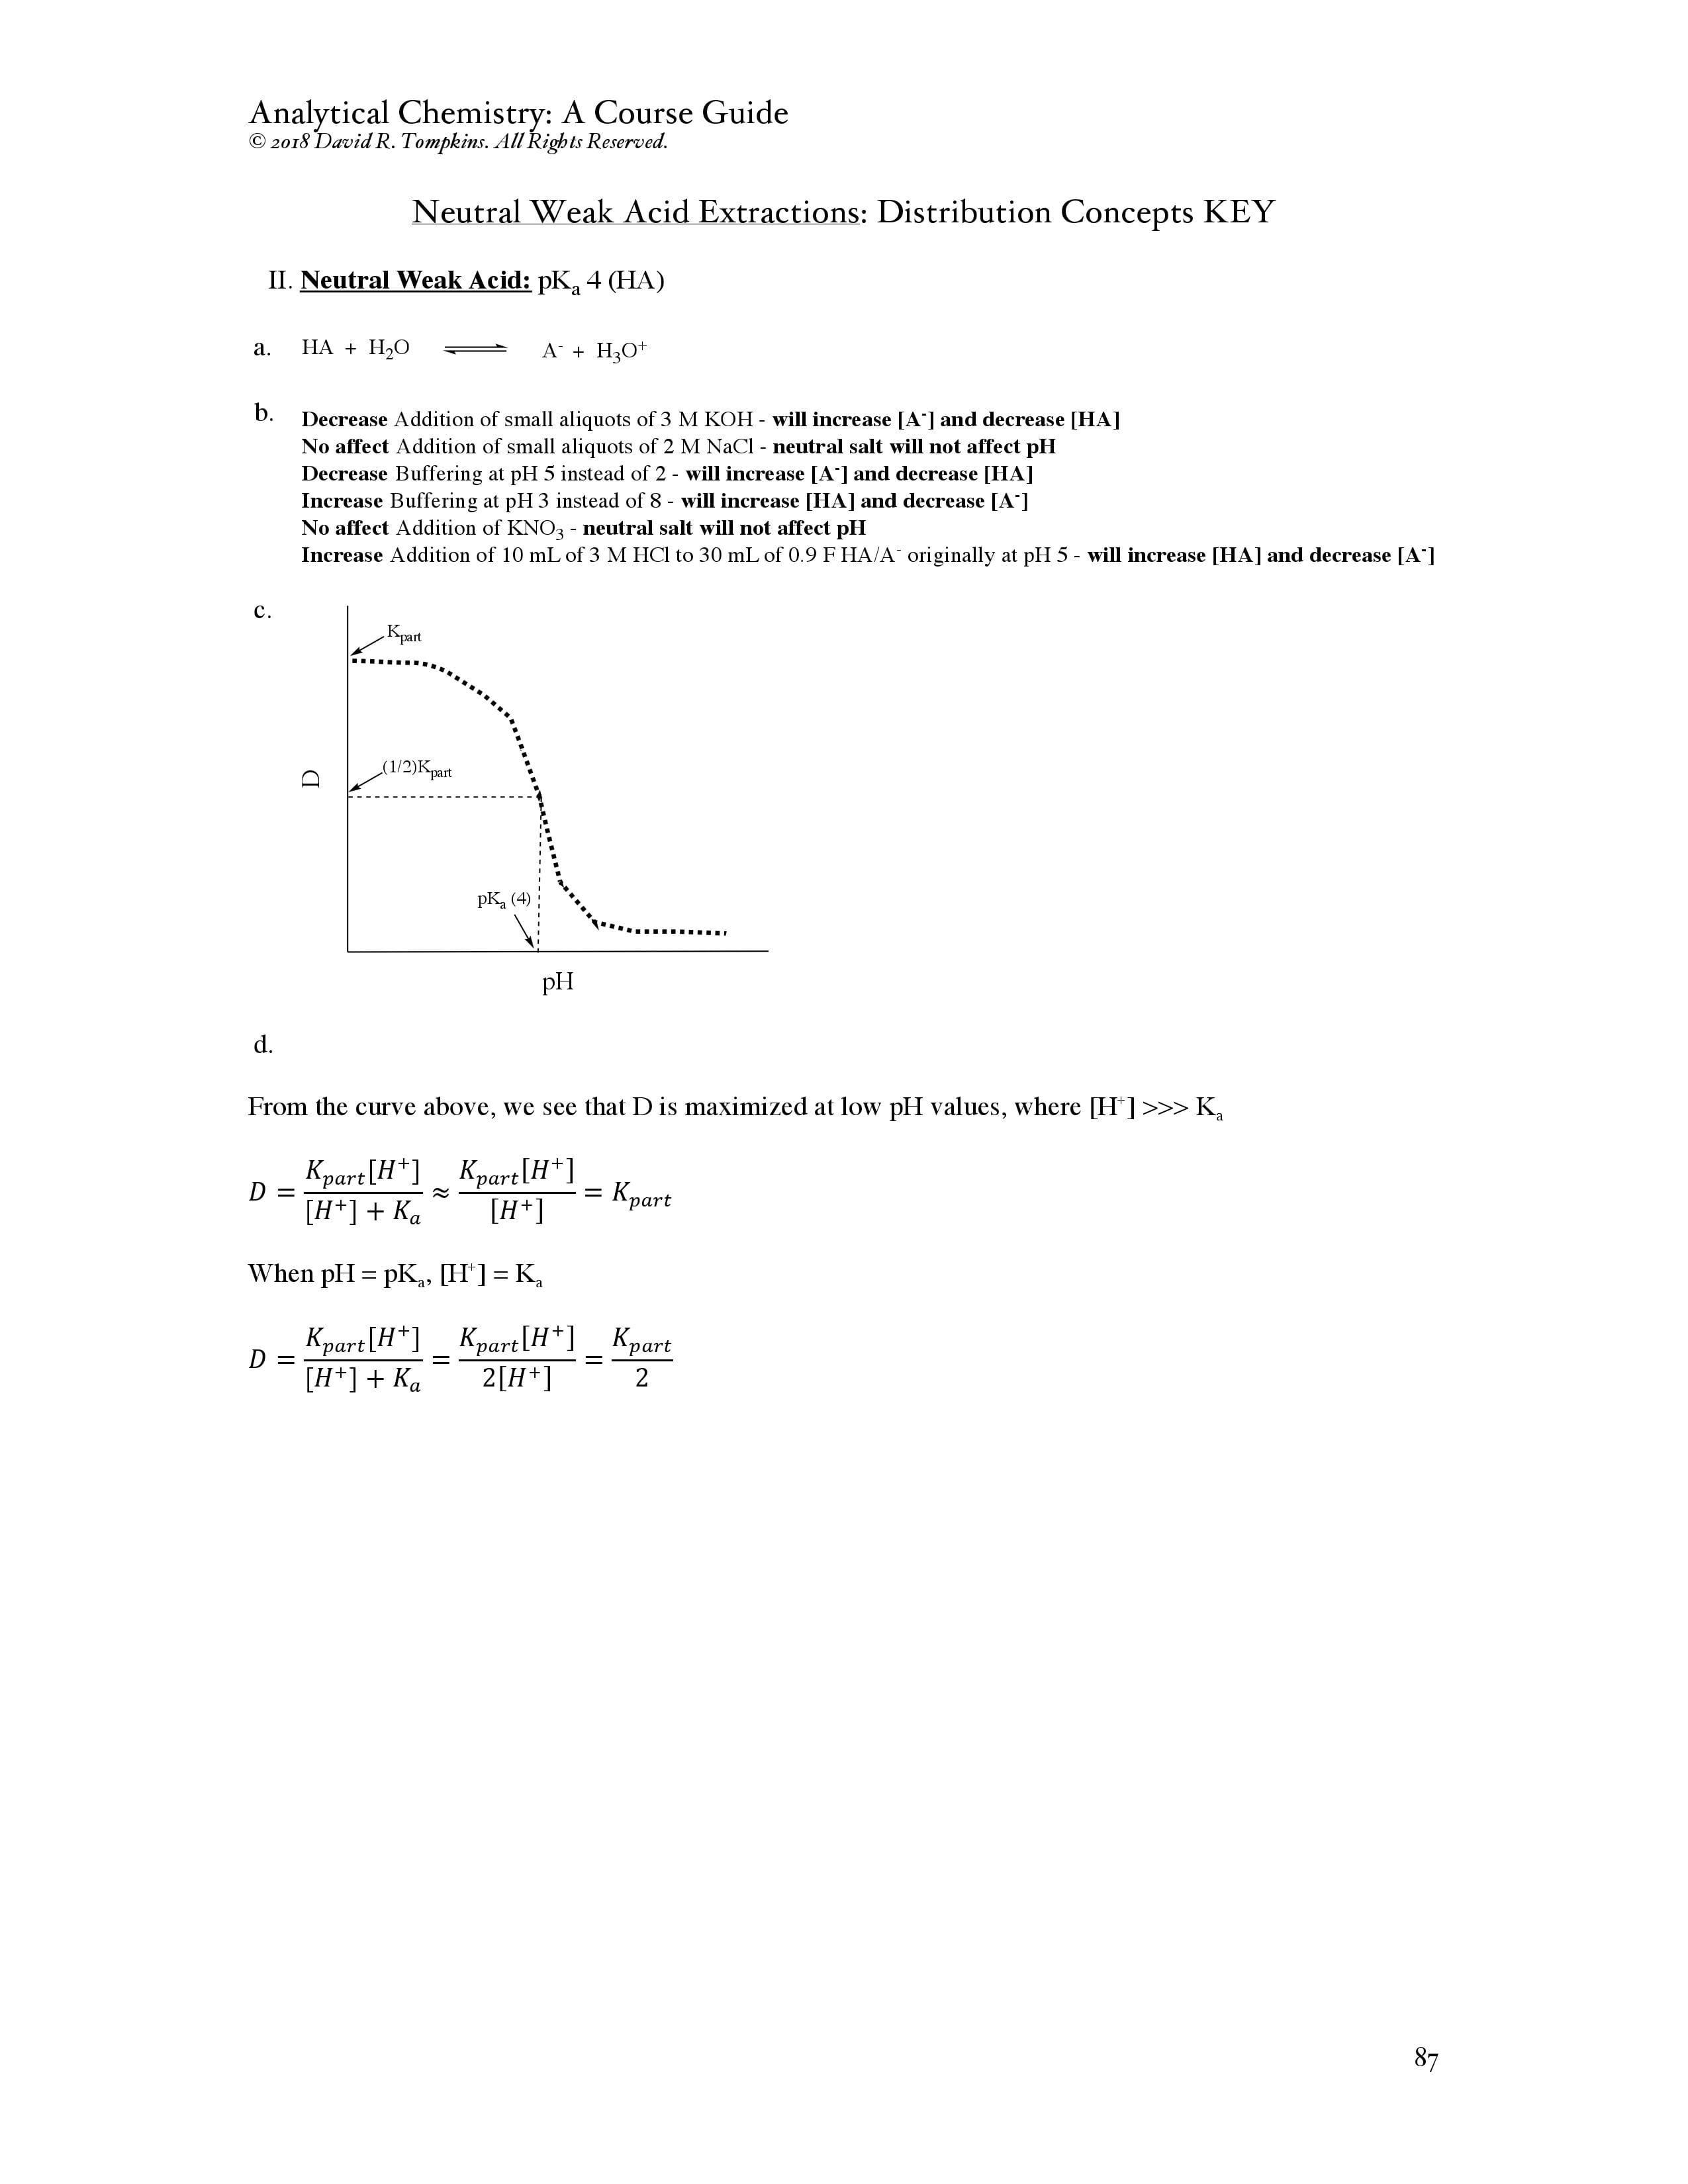 Introduction to Analytical Chemistry Course Guide Example Page 4